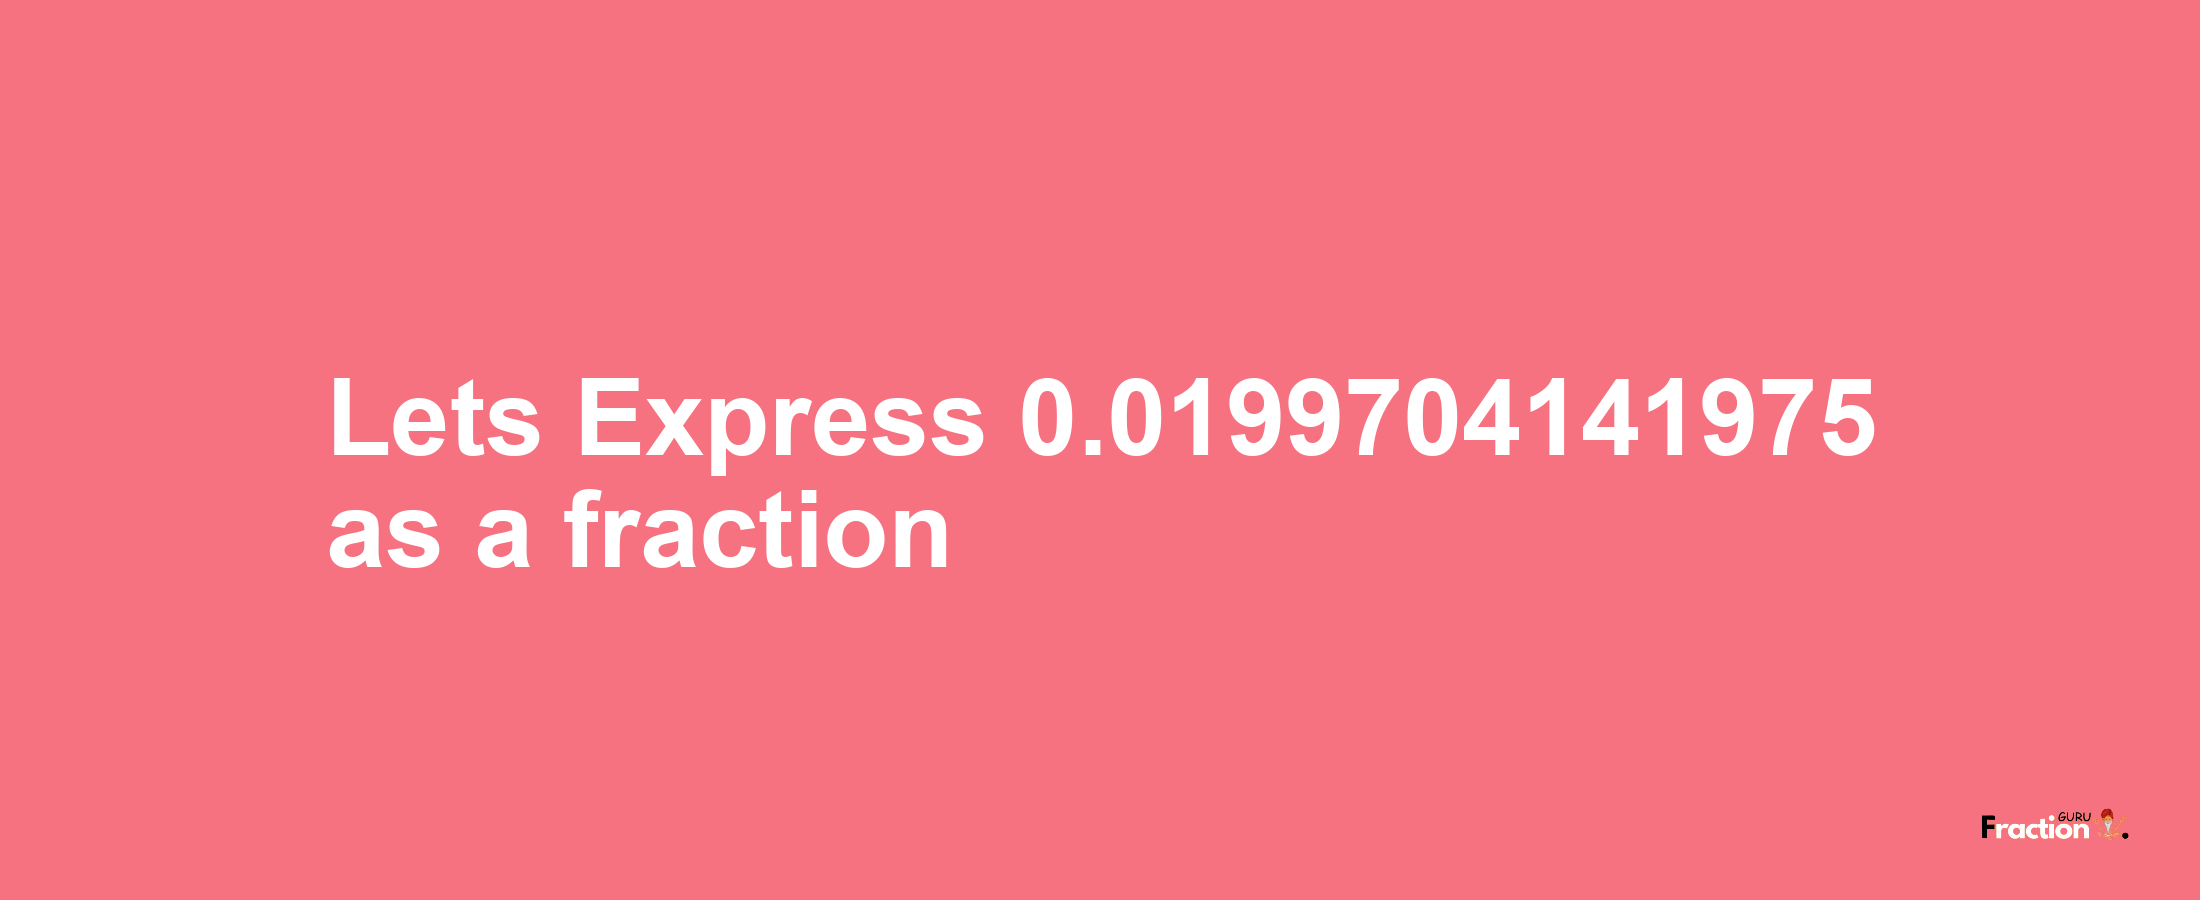 Lets Express 0.0199704141975 as afraction